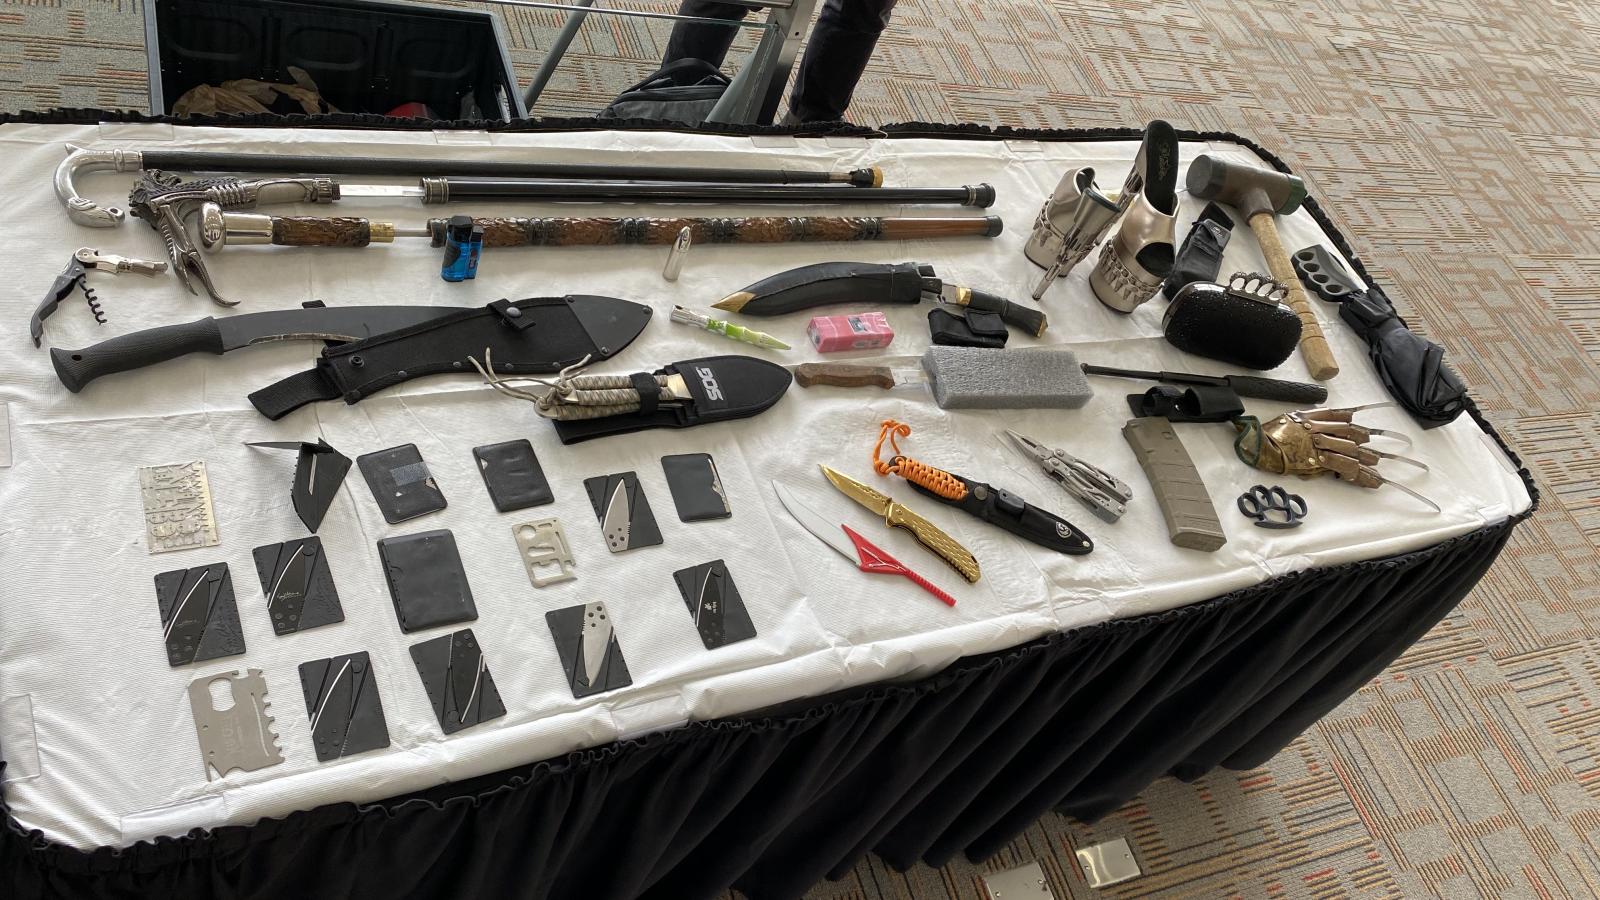 Items confiscated by TSA